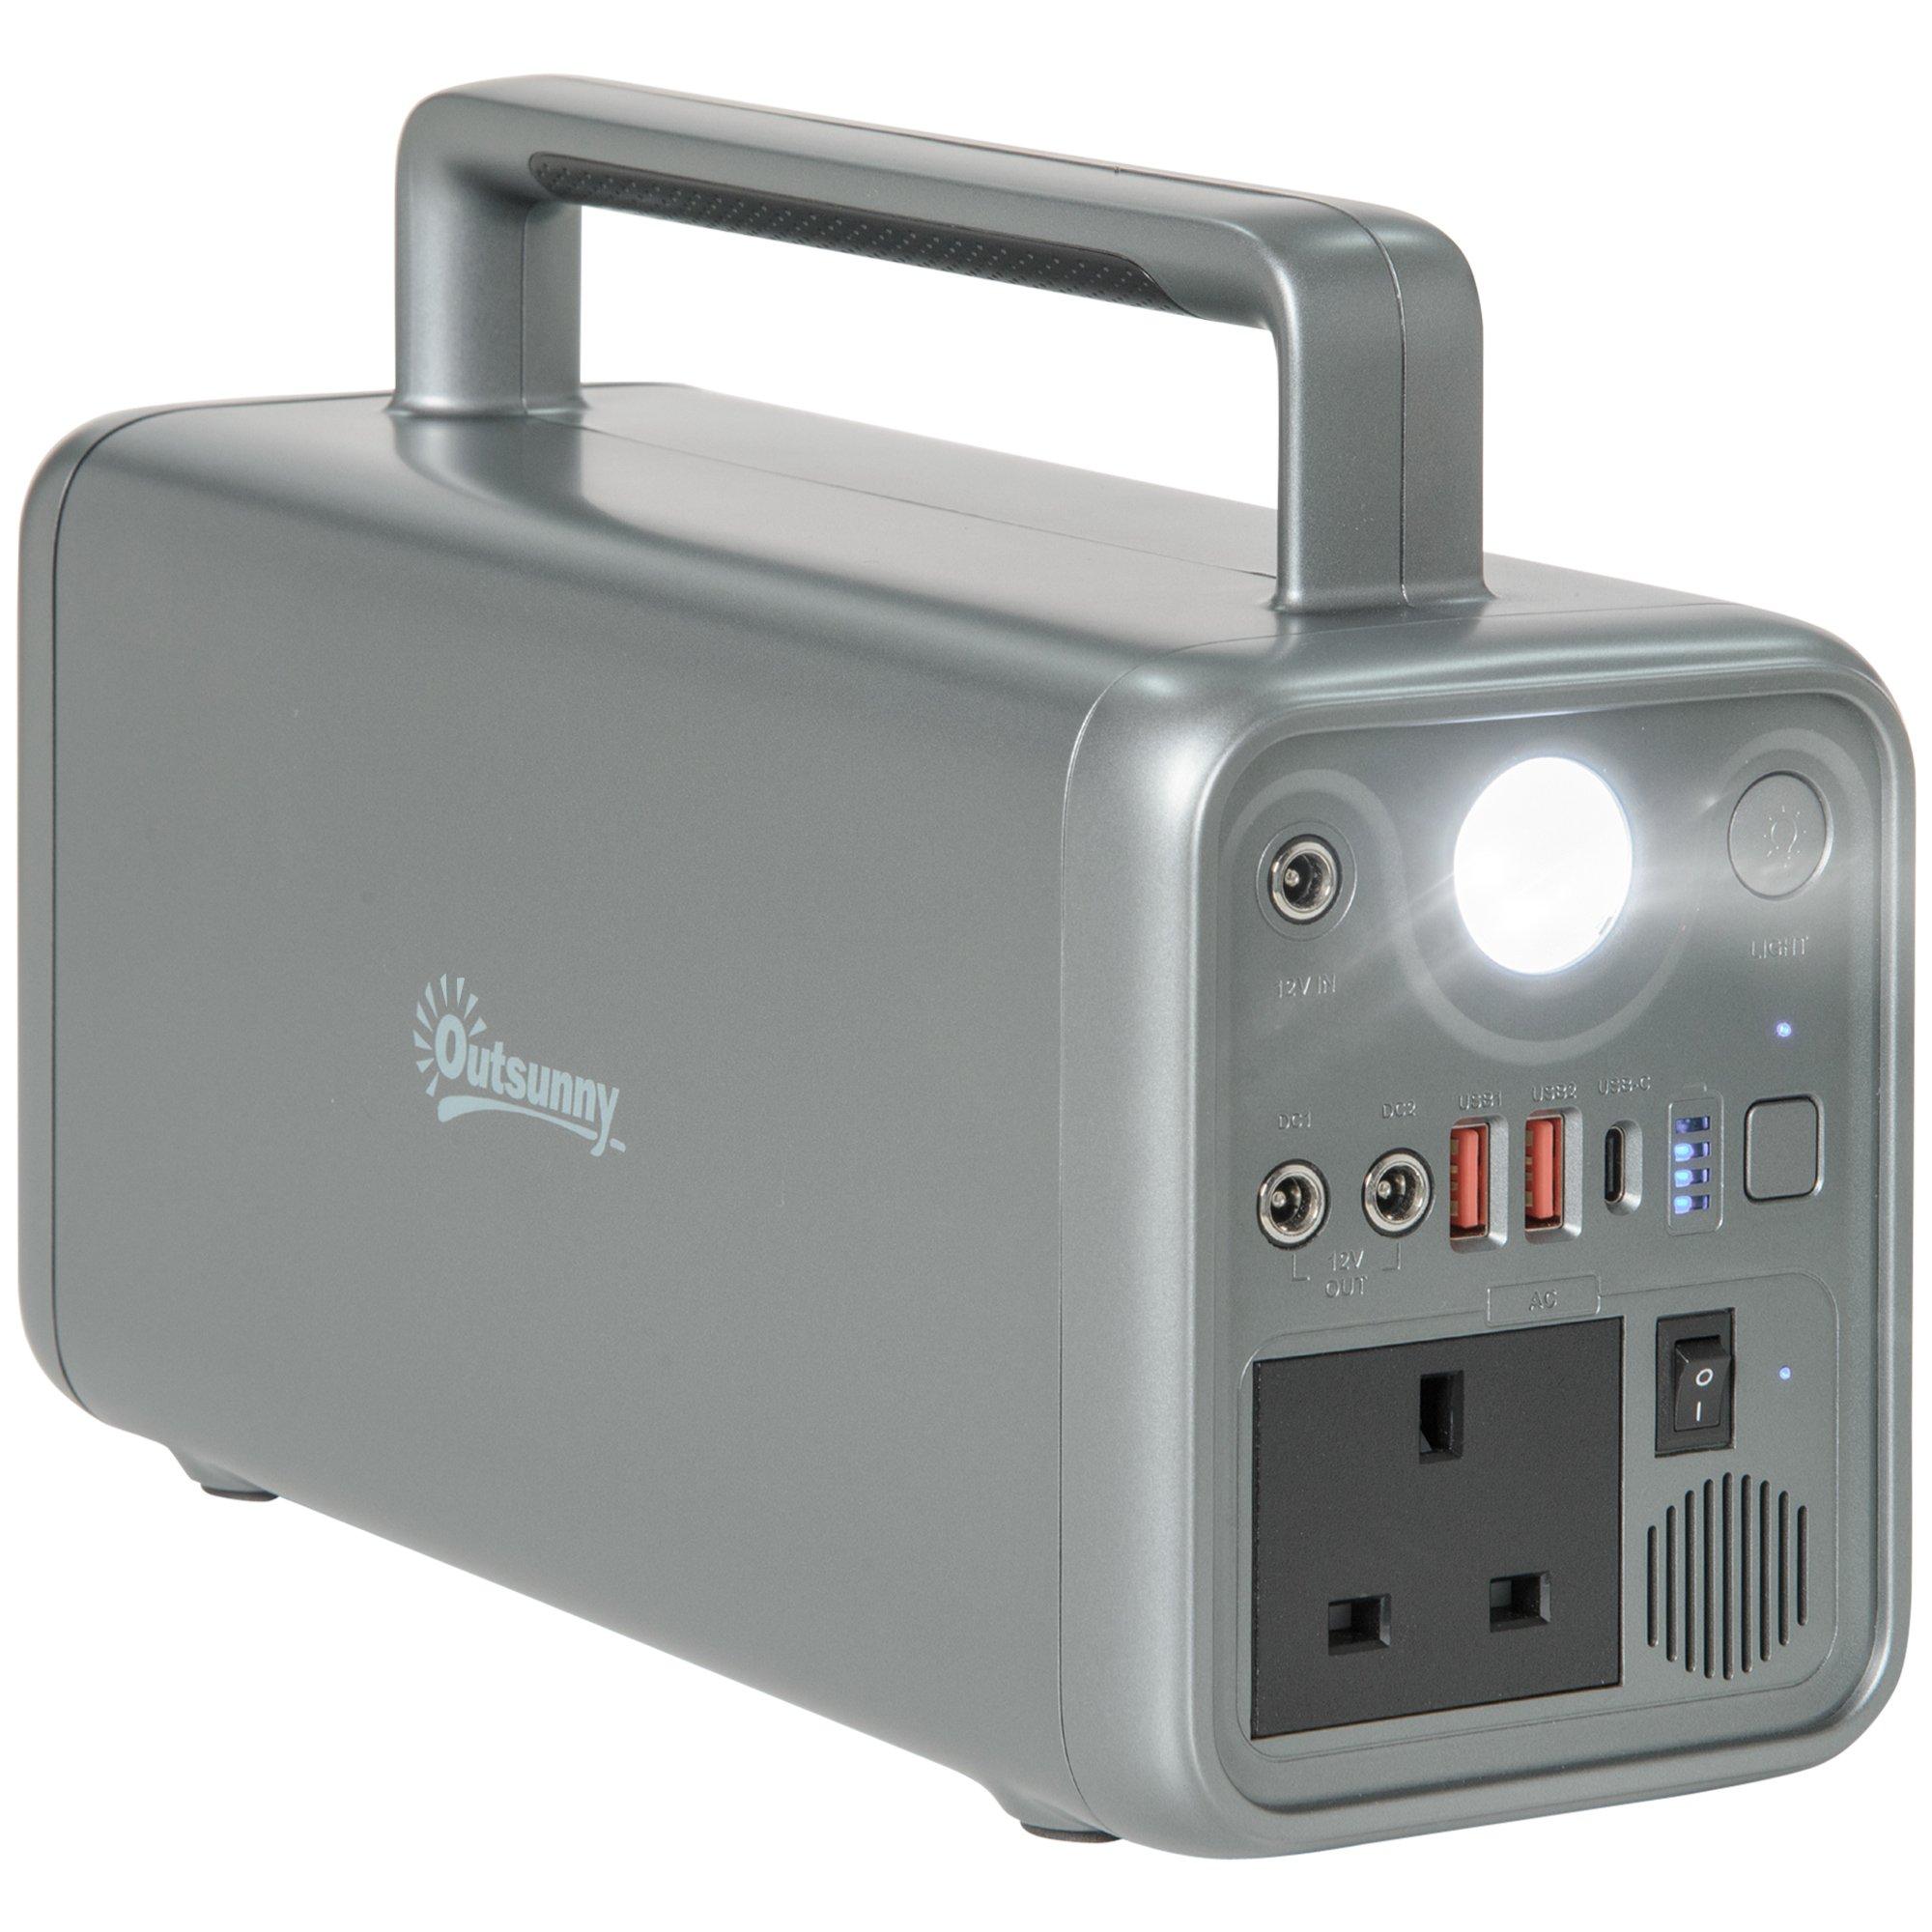 230.4Wh Portable Power Station with AC Outlets USB/PD/CAR Ports